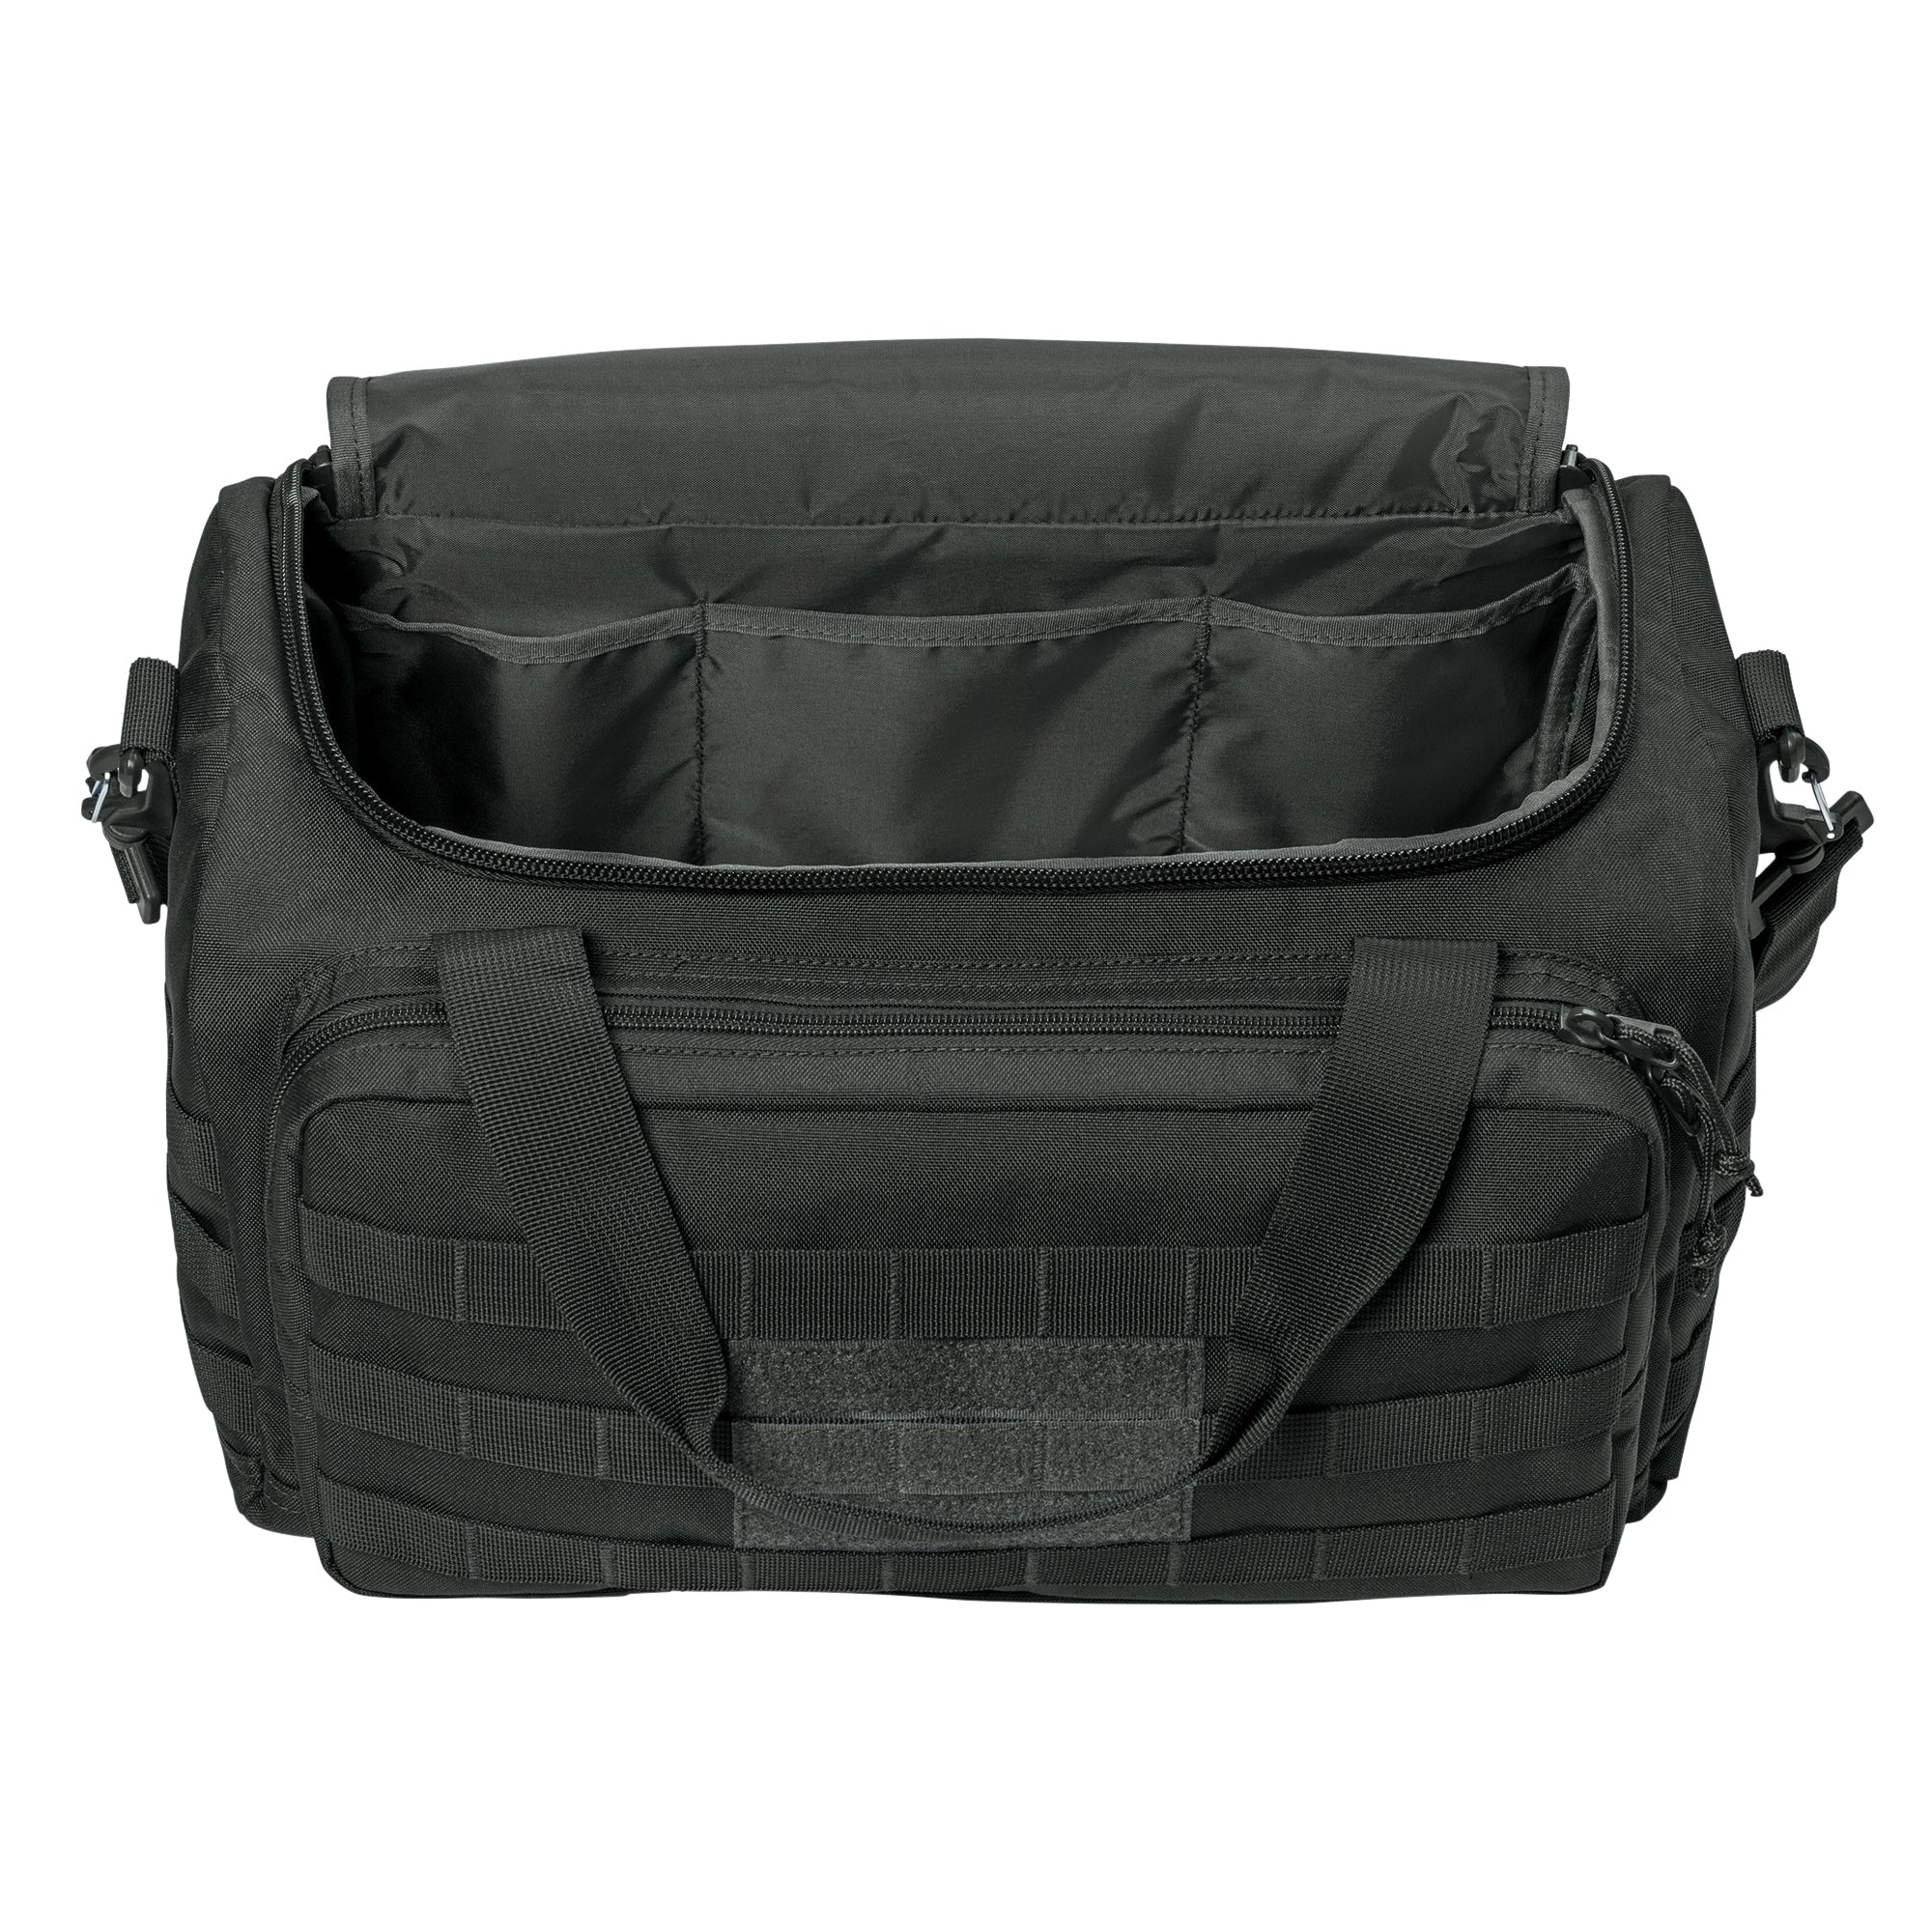 Charcoal Grey tactical range/gear bag pictured open, from front, on a white background. 600D polyester canvas Zippered, D-shaped main compartment, Interior storage pockets, Removable/adjustable shoulder strap, Front zippered pocket with daisy chain/loop panel for patches, Daisy chains on sides.